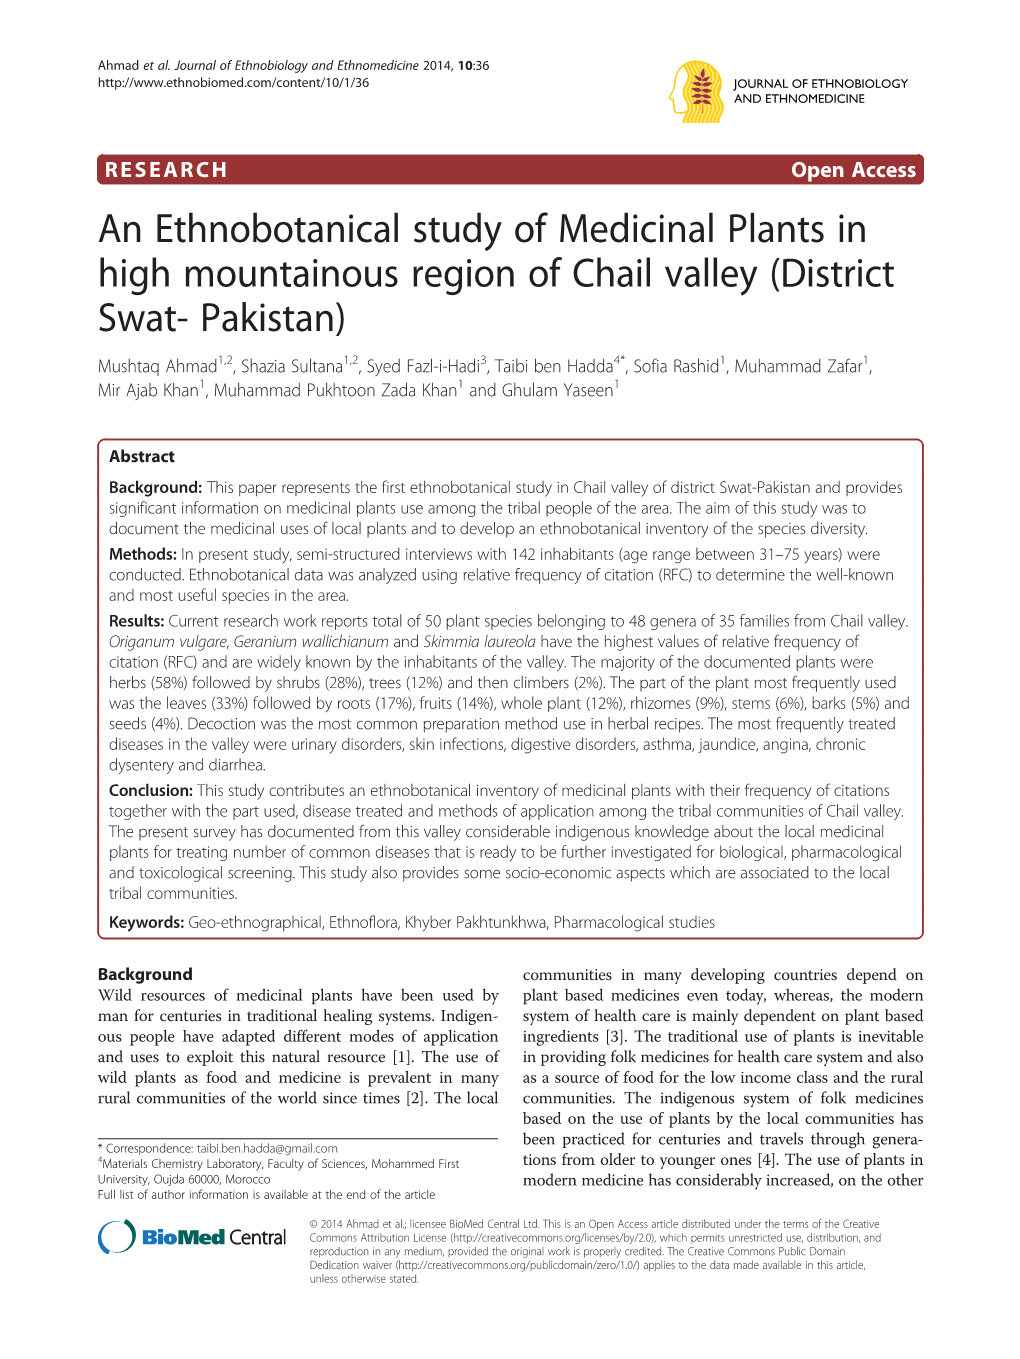 An Ethnobotanical Study of Medicinal Plants in High Mountainous Region